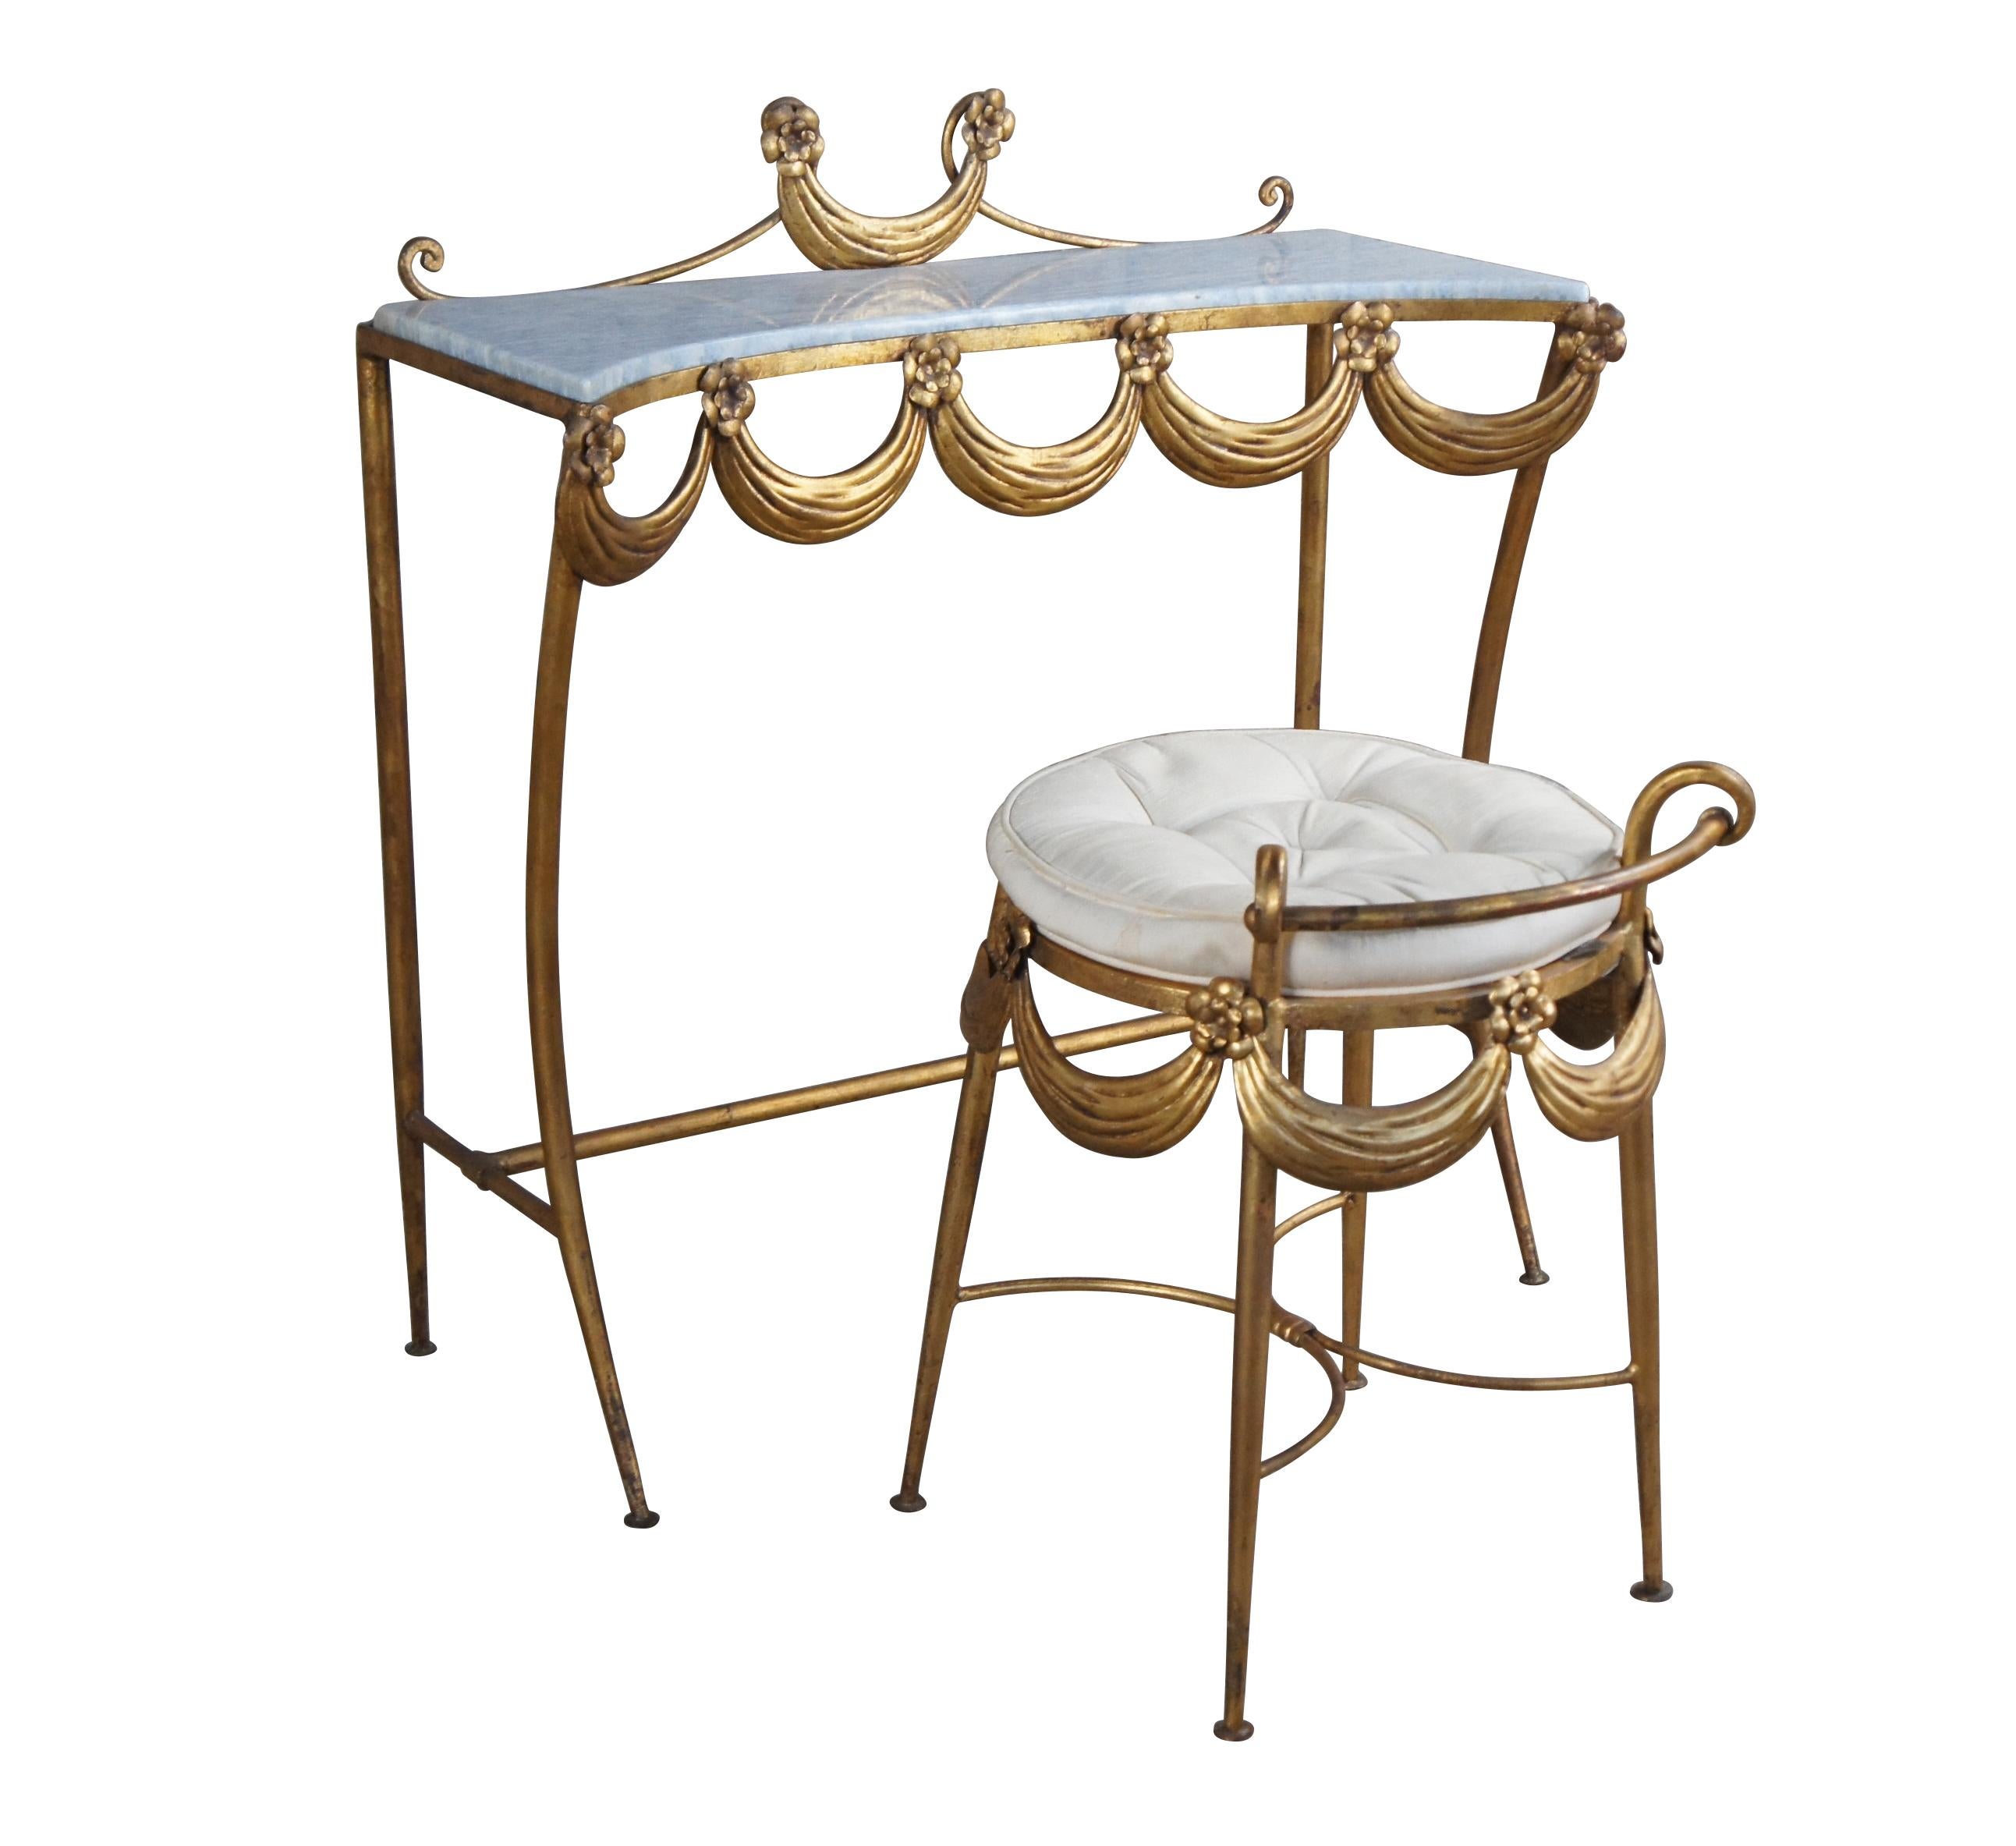 Rare The Walter Hatches mid century dressing vanity table with mirror, stool and marble top.  Made of gilded metal featuring a Neoclassical Italian Florentine motif of ribbons and flowers.  Made in Italy.

Dimensions:
31.25